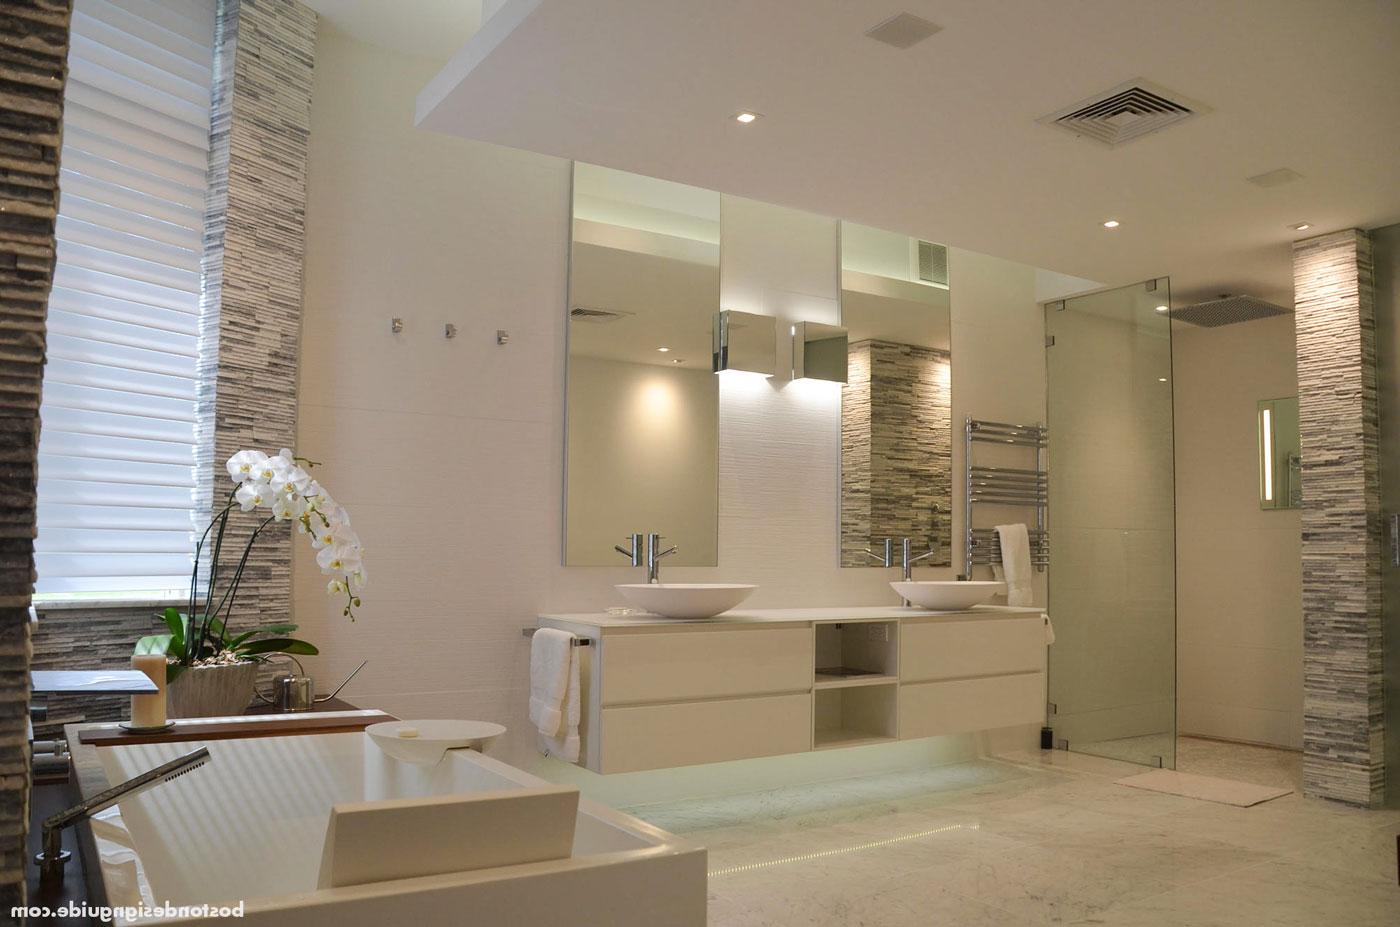 Master bath with home integration technology by SDI